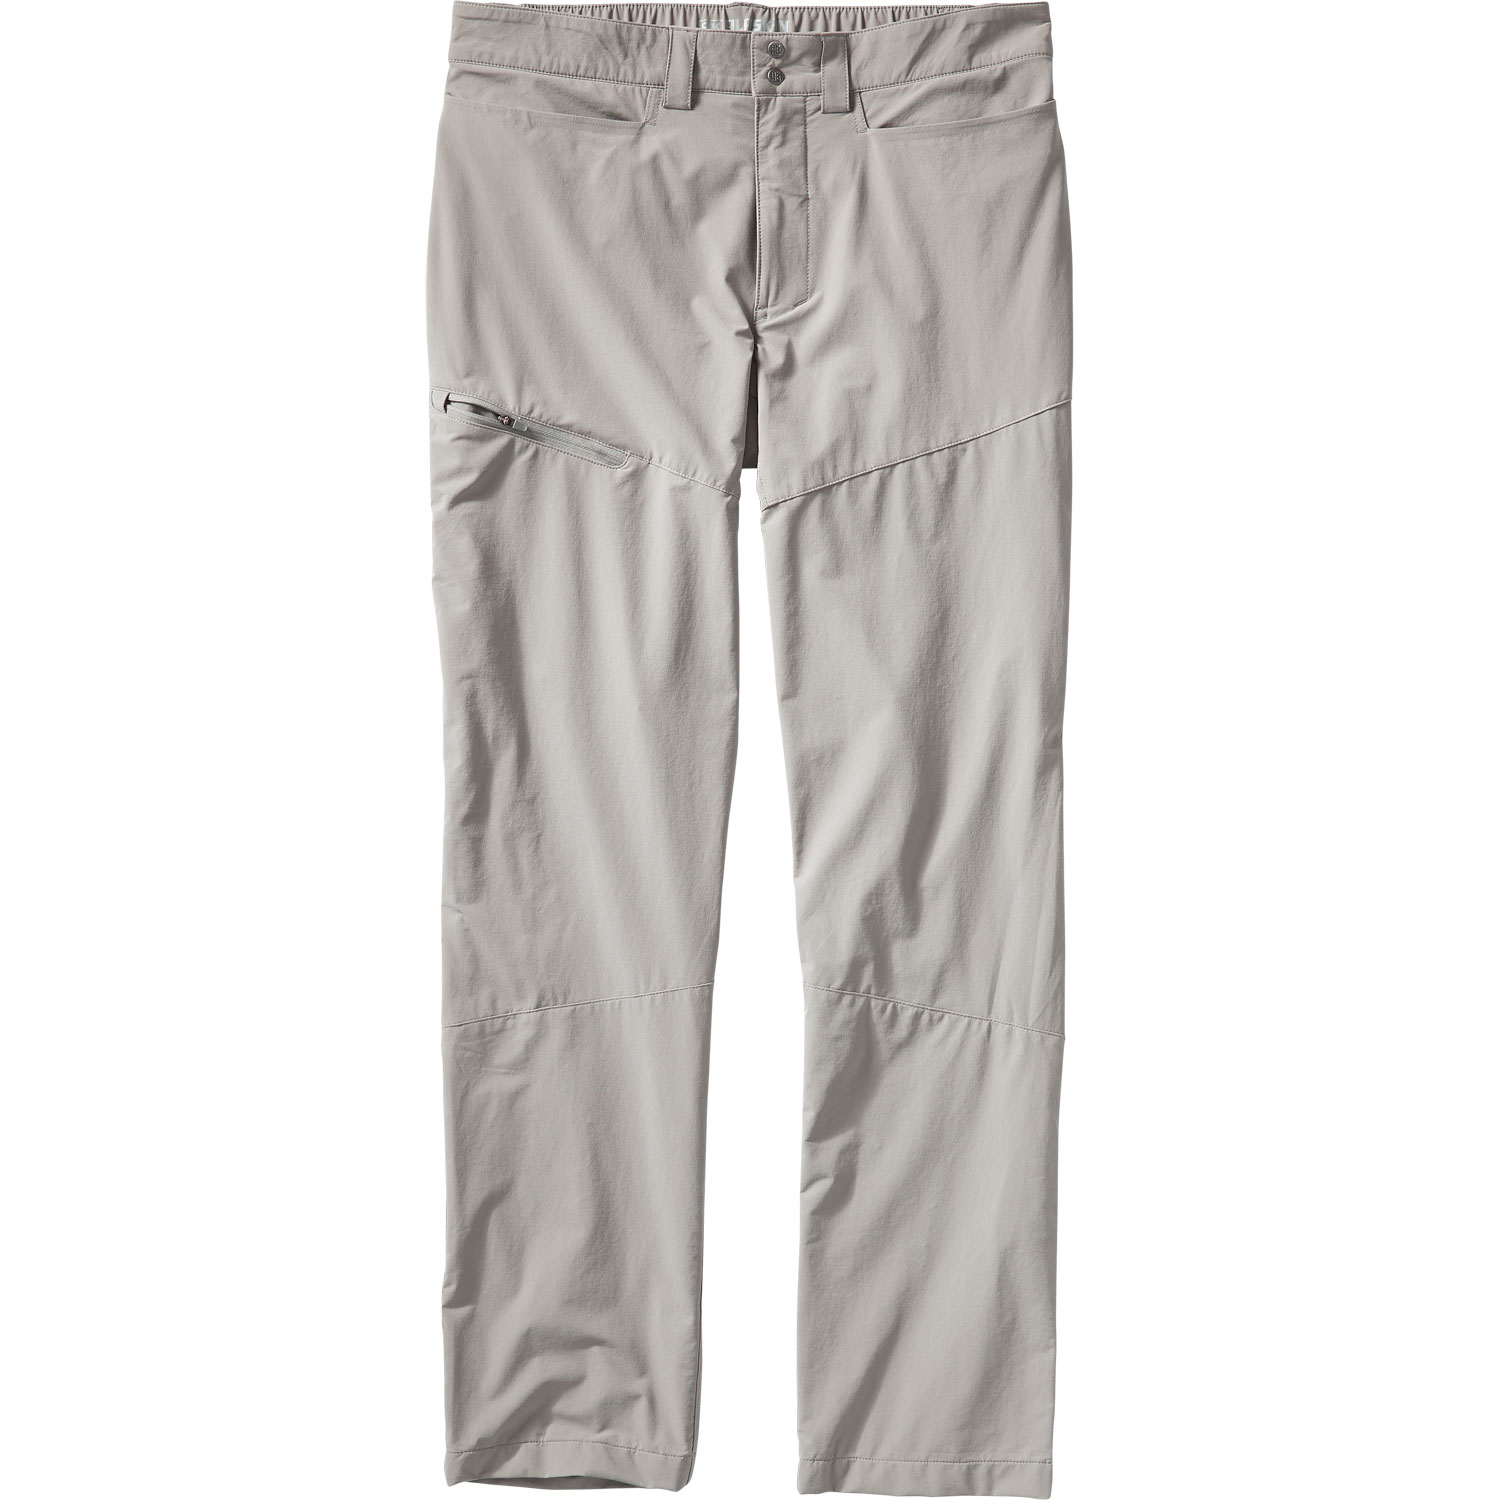 Alaskan Hardgear By Duluth Trading Co. Women's Clothing On Sale Up To 90%  Off Retail